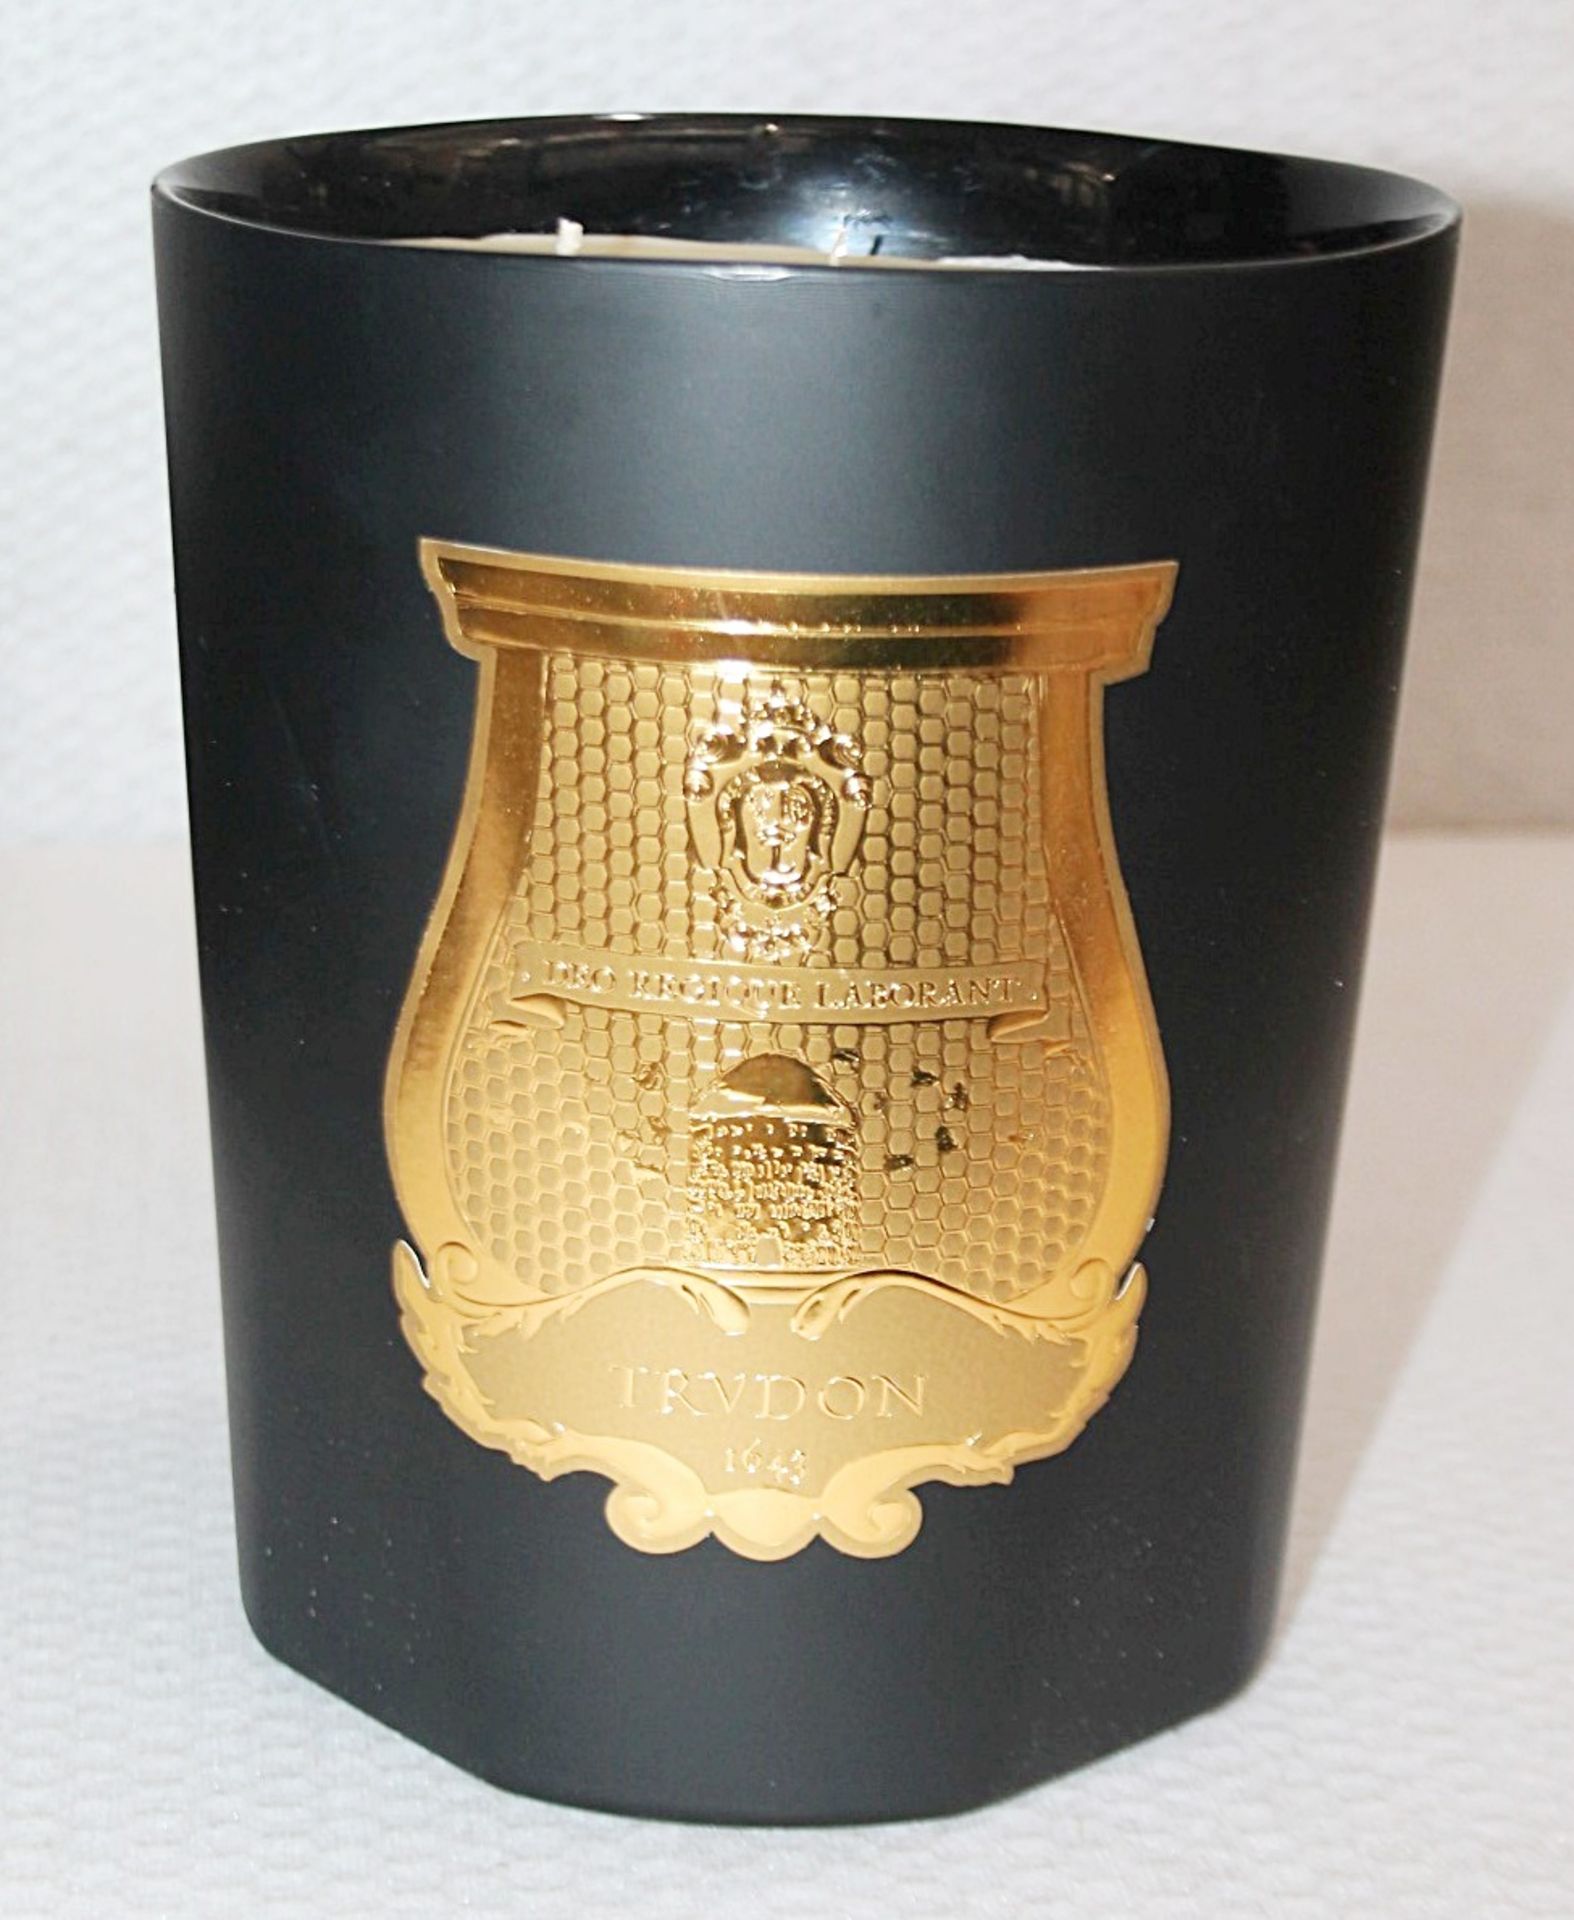 1 x CIRE TRUDON Limited Edition 'Mary' Great Candle (2.8kg) - Original Price £495.00 - Unused - Image 3 of 10